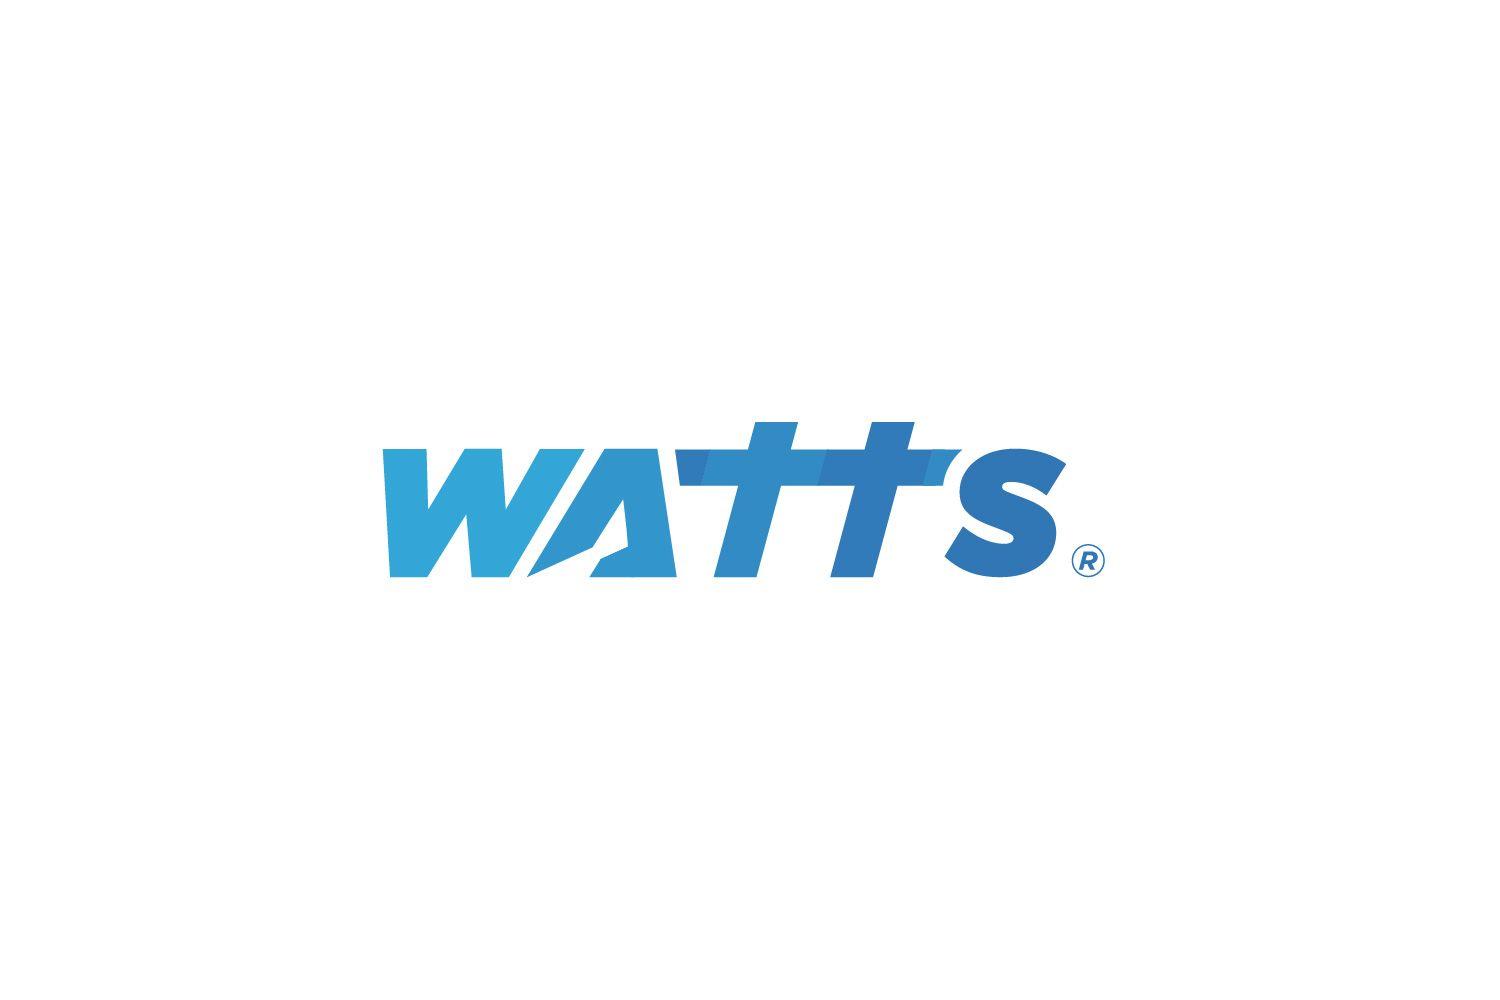 Watts Logo - Modern, Colorful Logo Design for Watts by Rzk | Design #20070766